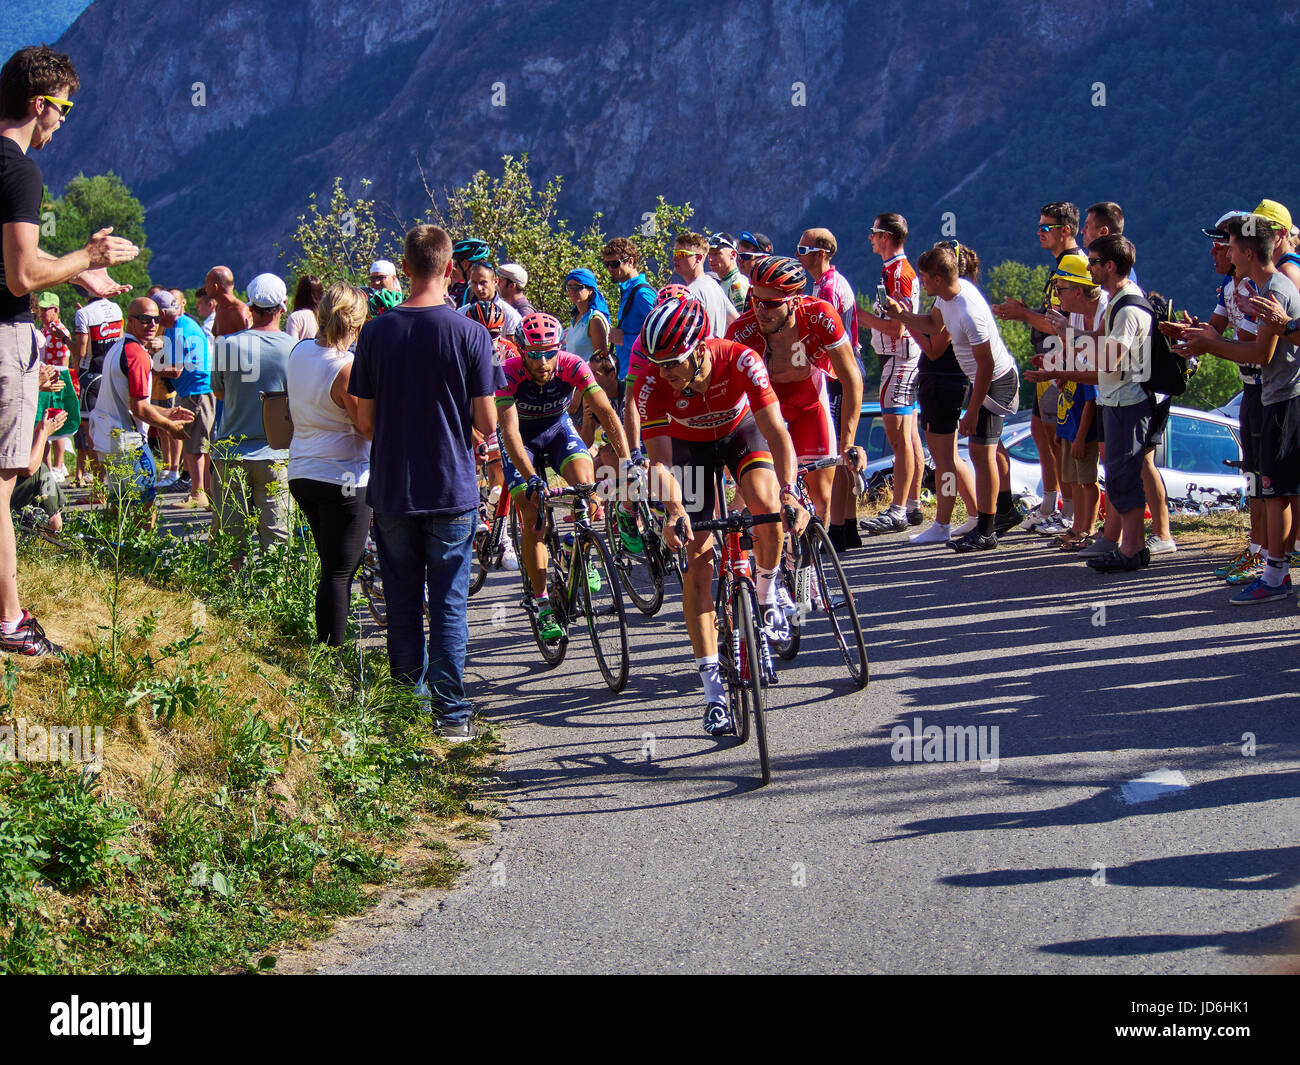 MONTVERNIER, FRANCE - JULY 23 2015: riders in a road turn with spectators on stage 18 in Tour de France 2015 Stock Photo